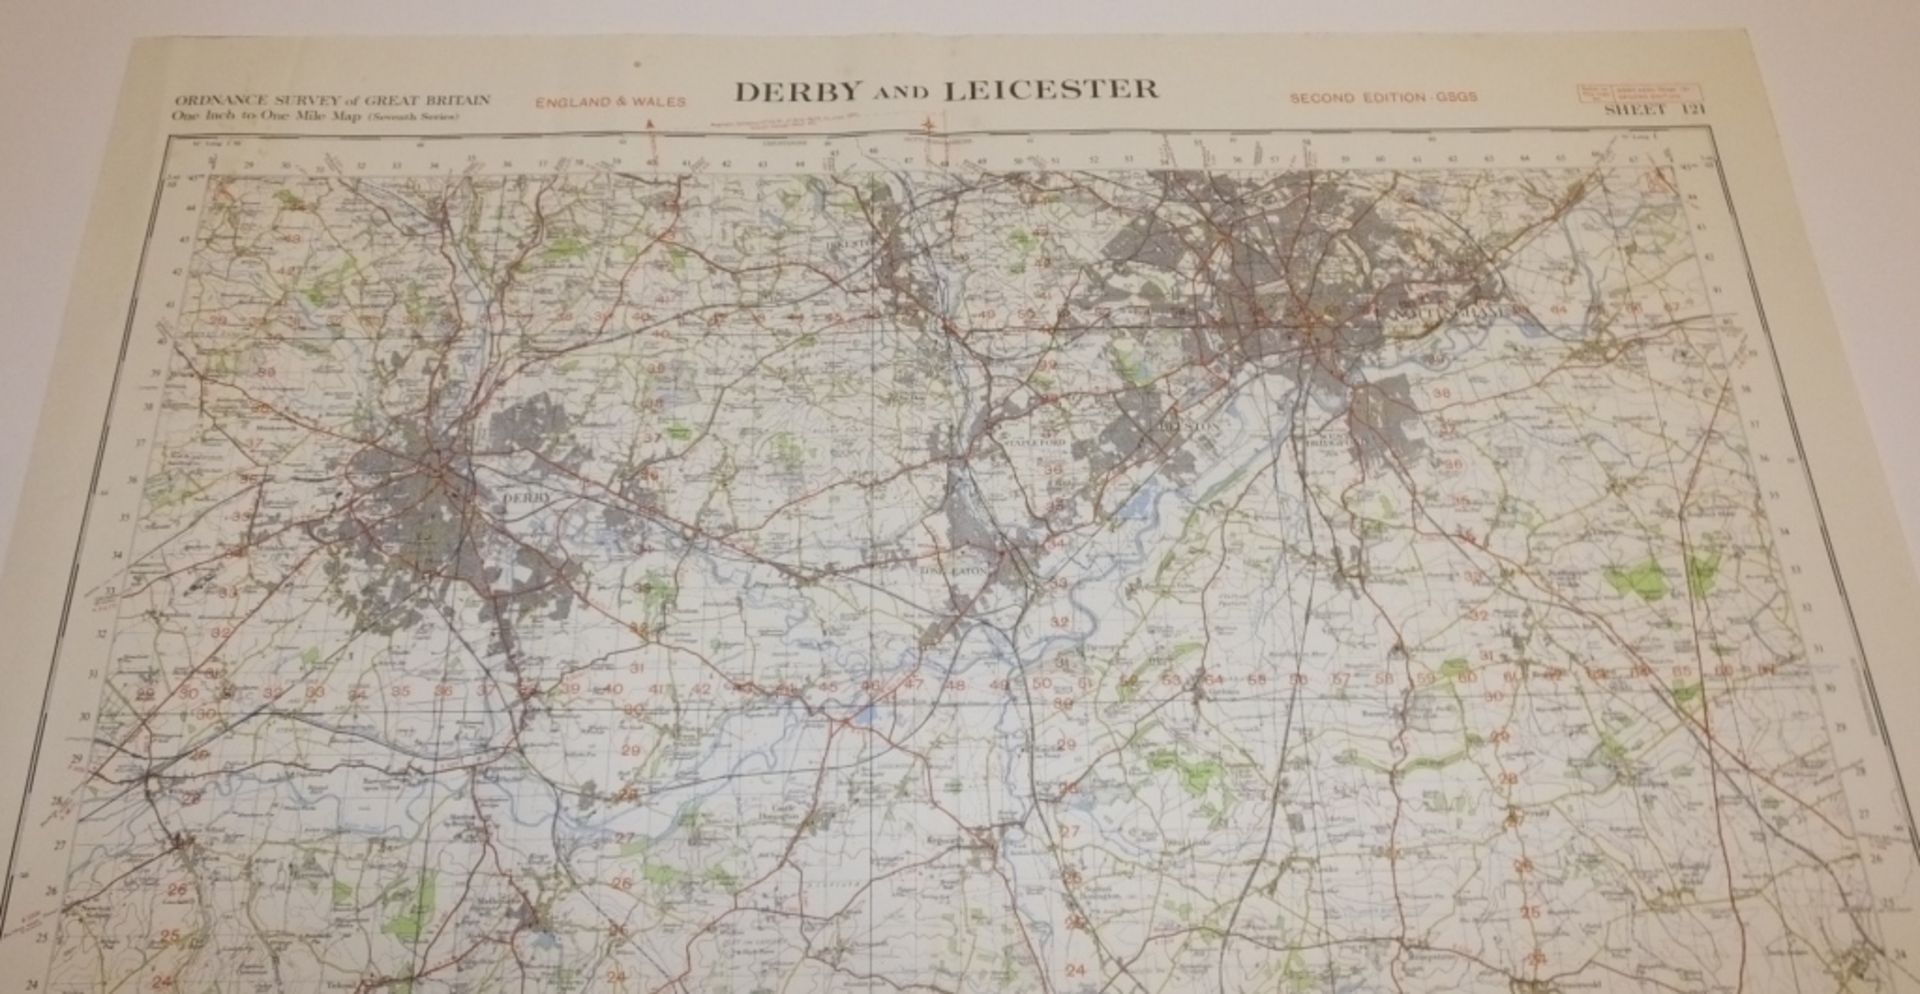 15x ENGLAND & WALES MAP DERBY LEICESTER 1INCH 1MILE 1954 7TH SERIES 2GSGS SHEET 121 - Bild 3 aus 5